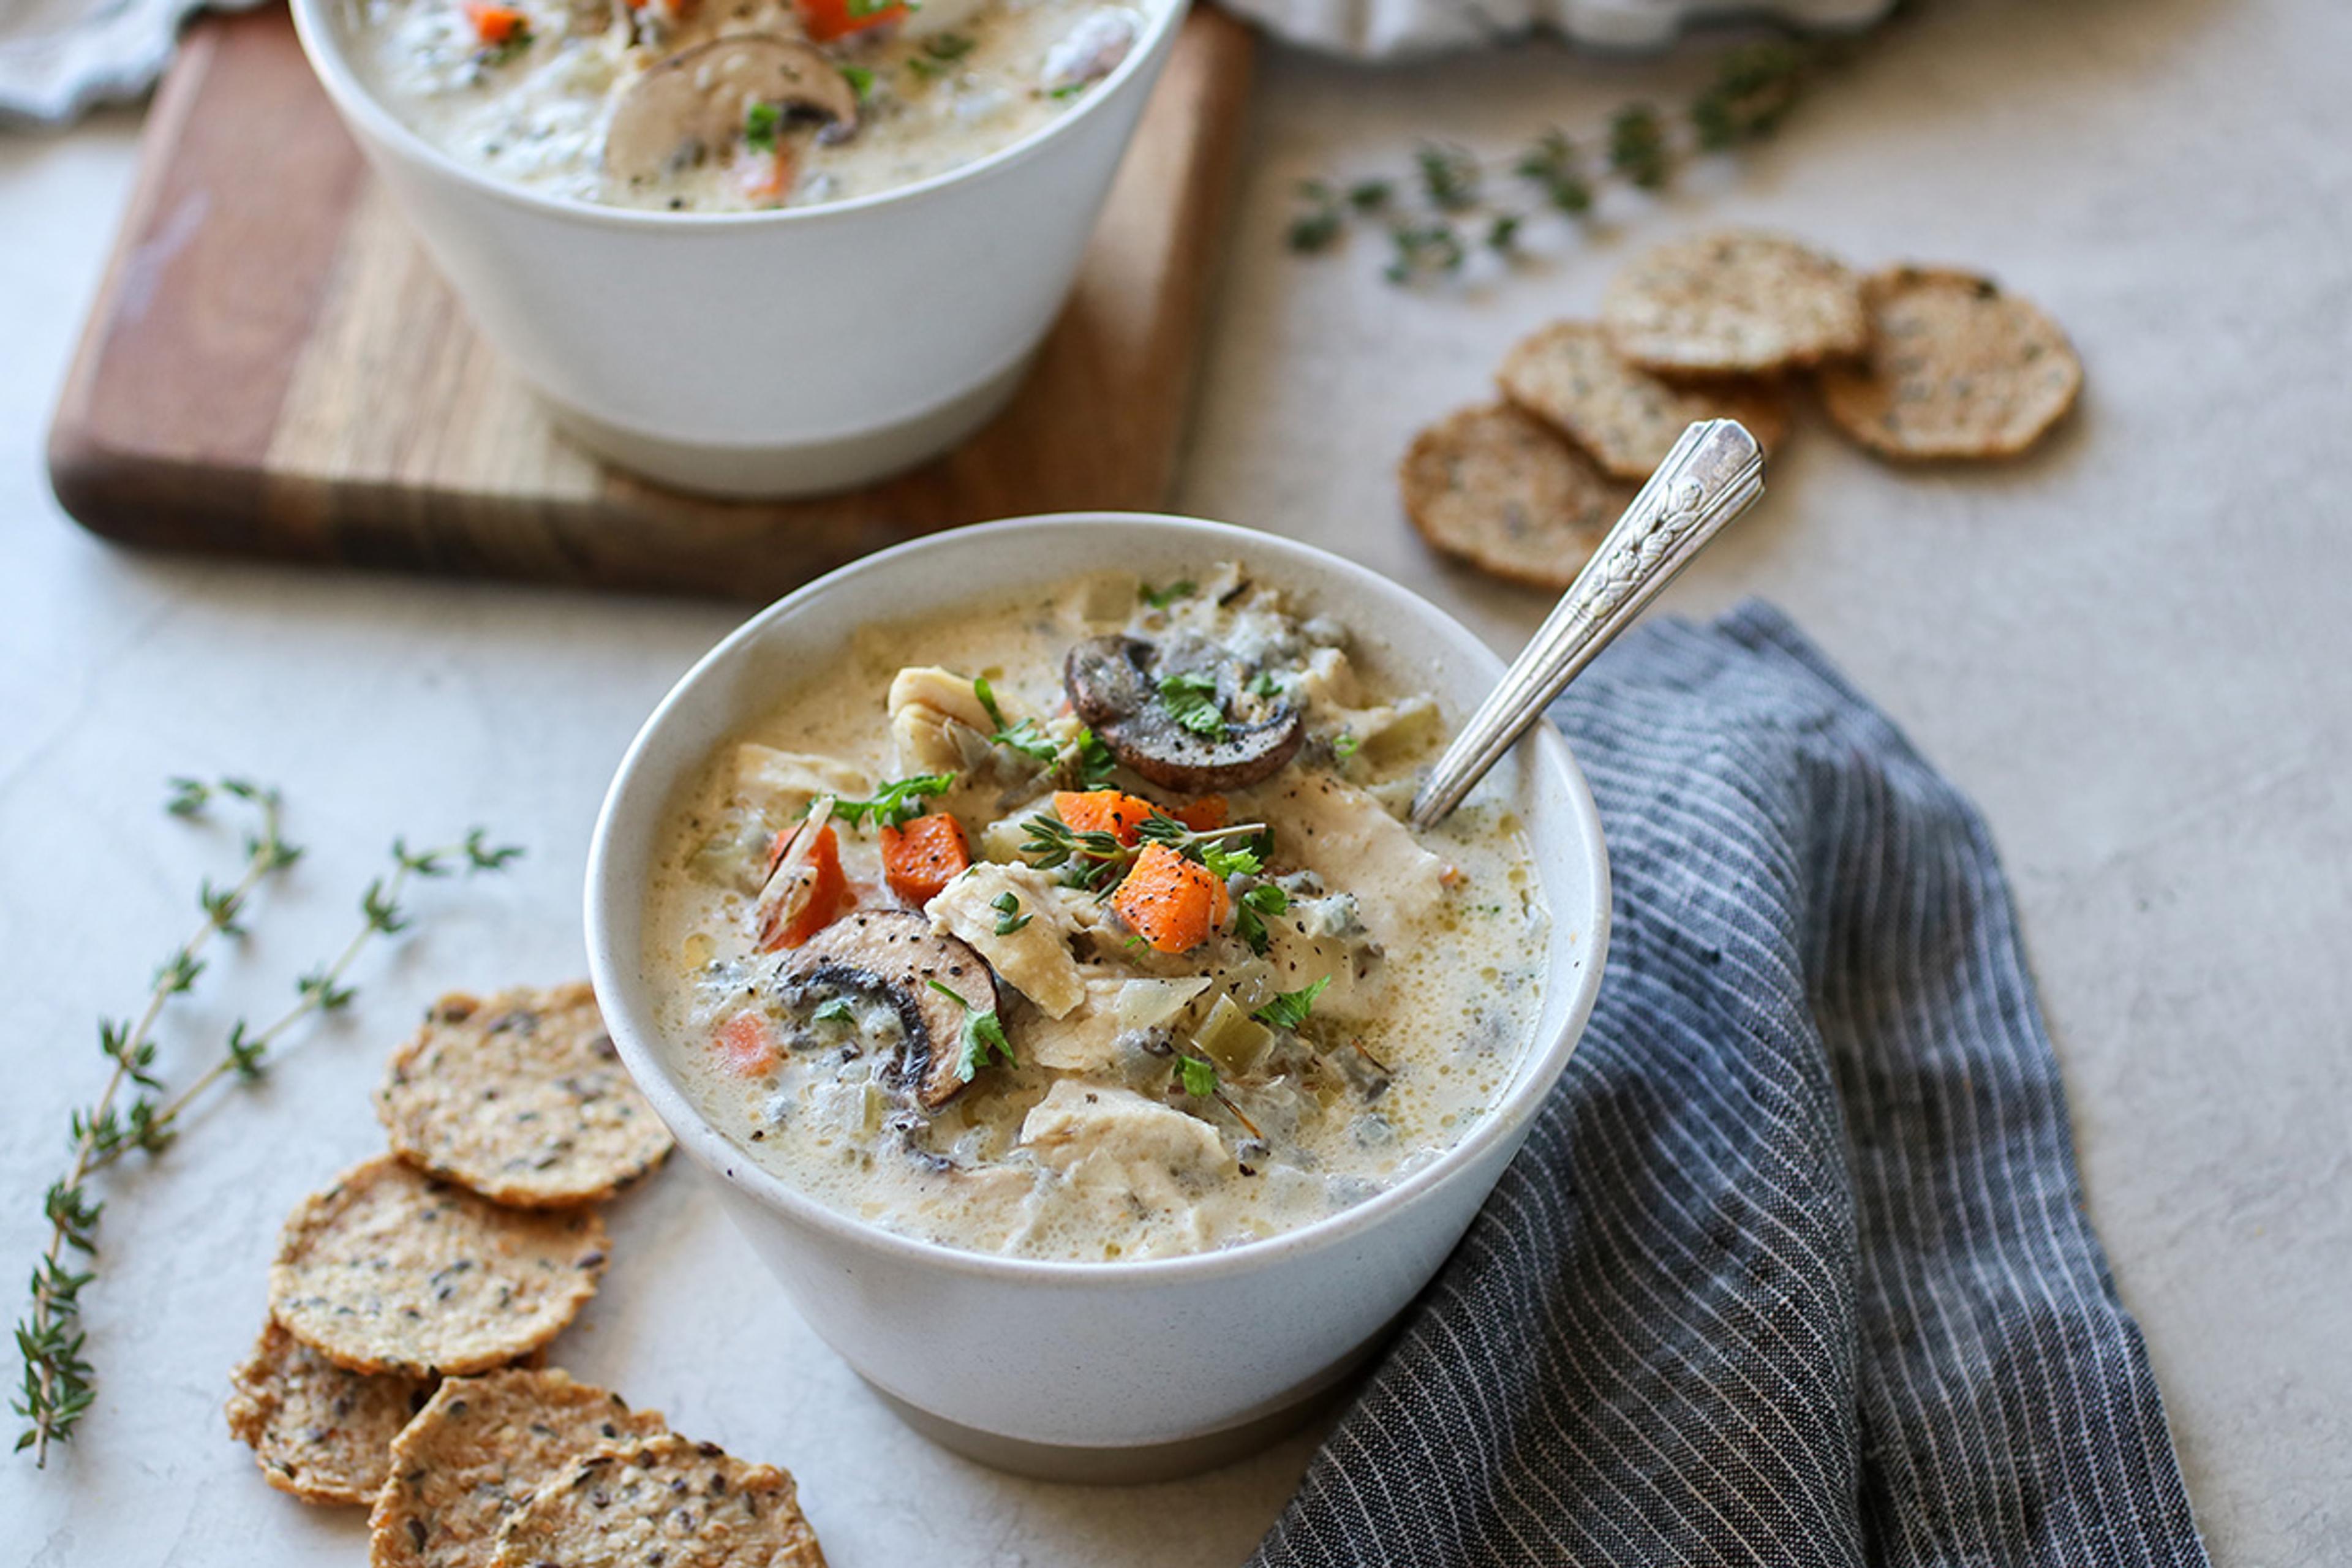  A hearty chicken and wild rice soup loaded with chicken, carrots, and mushrooms, topped with a sprinkle of pepper.